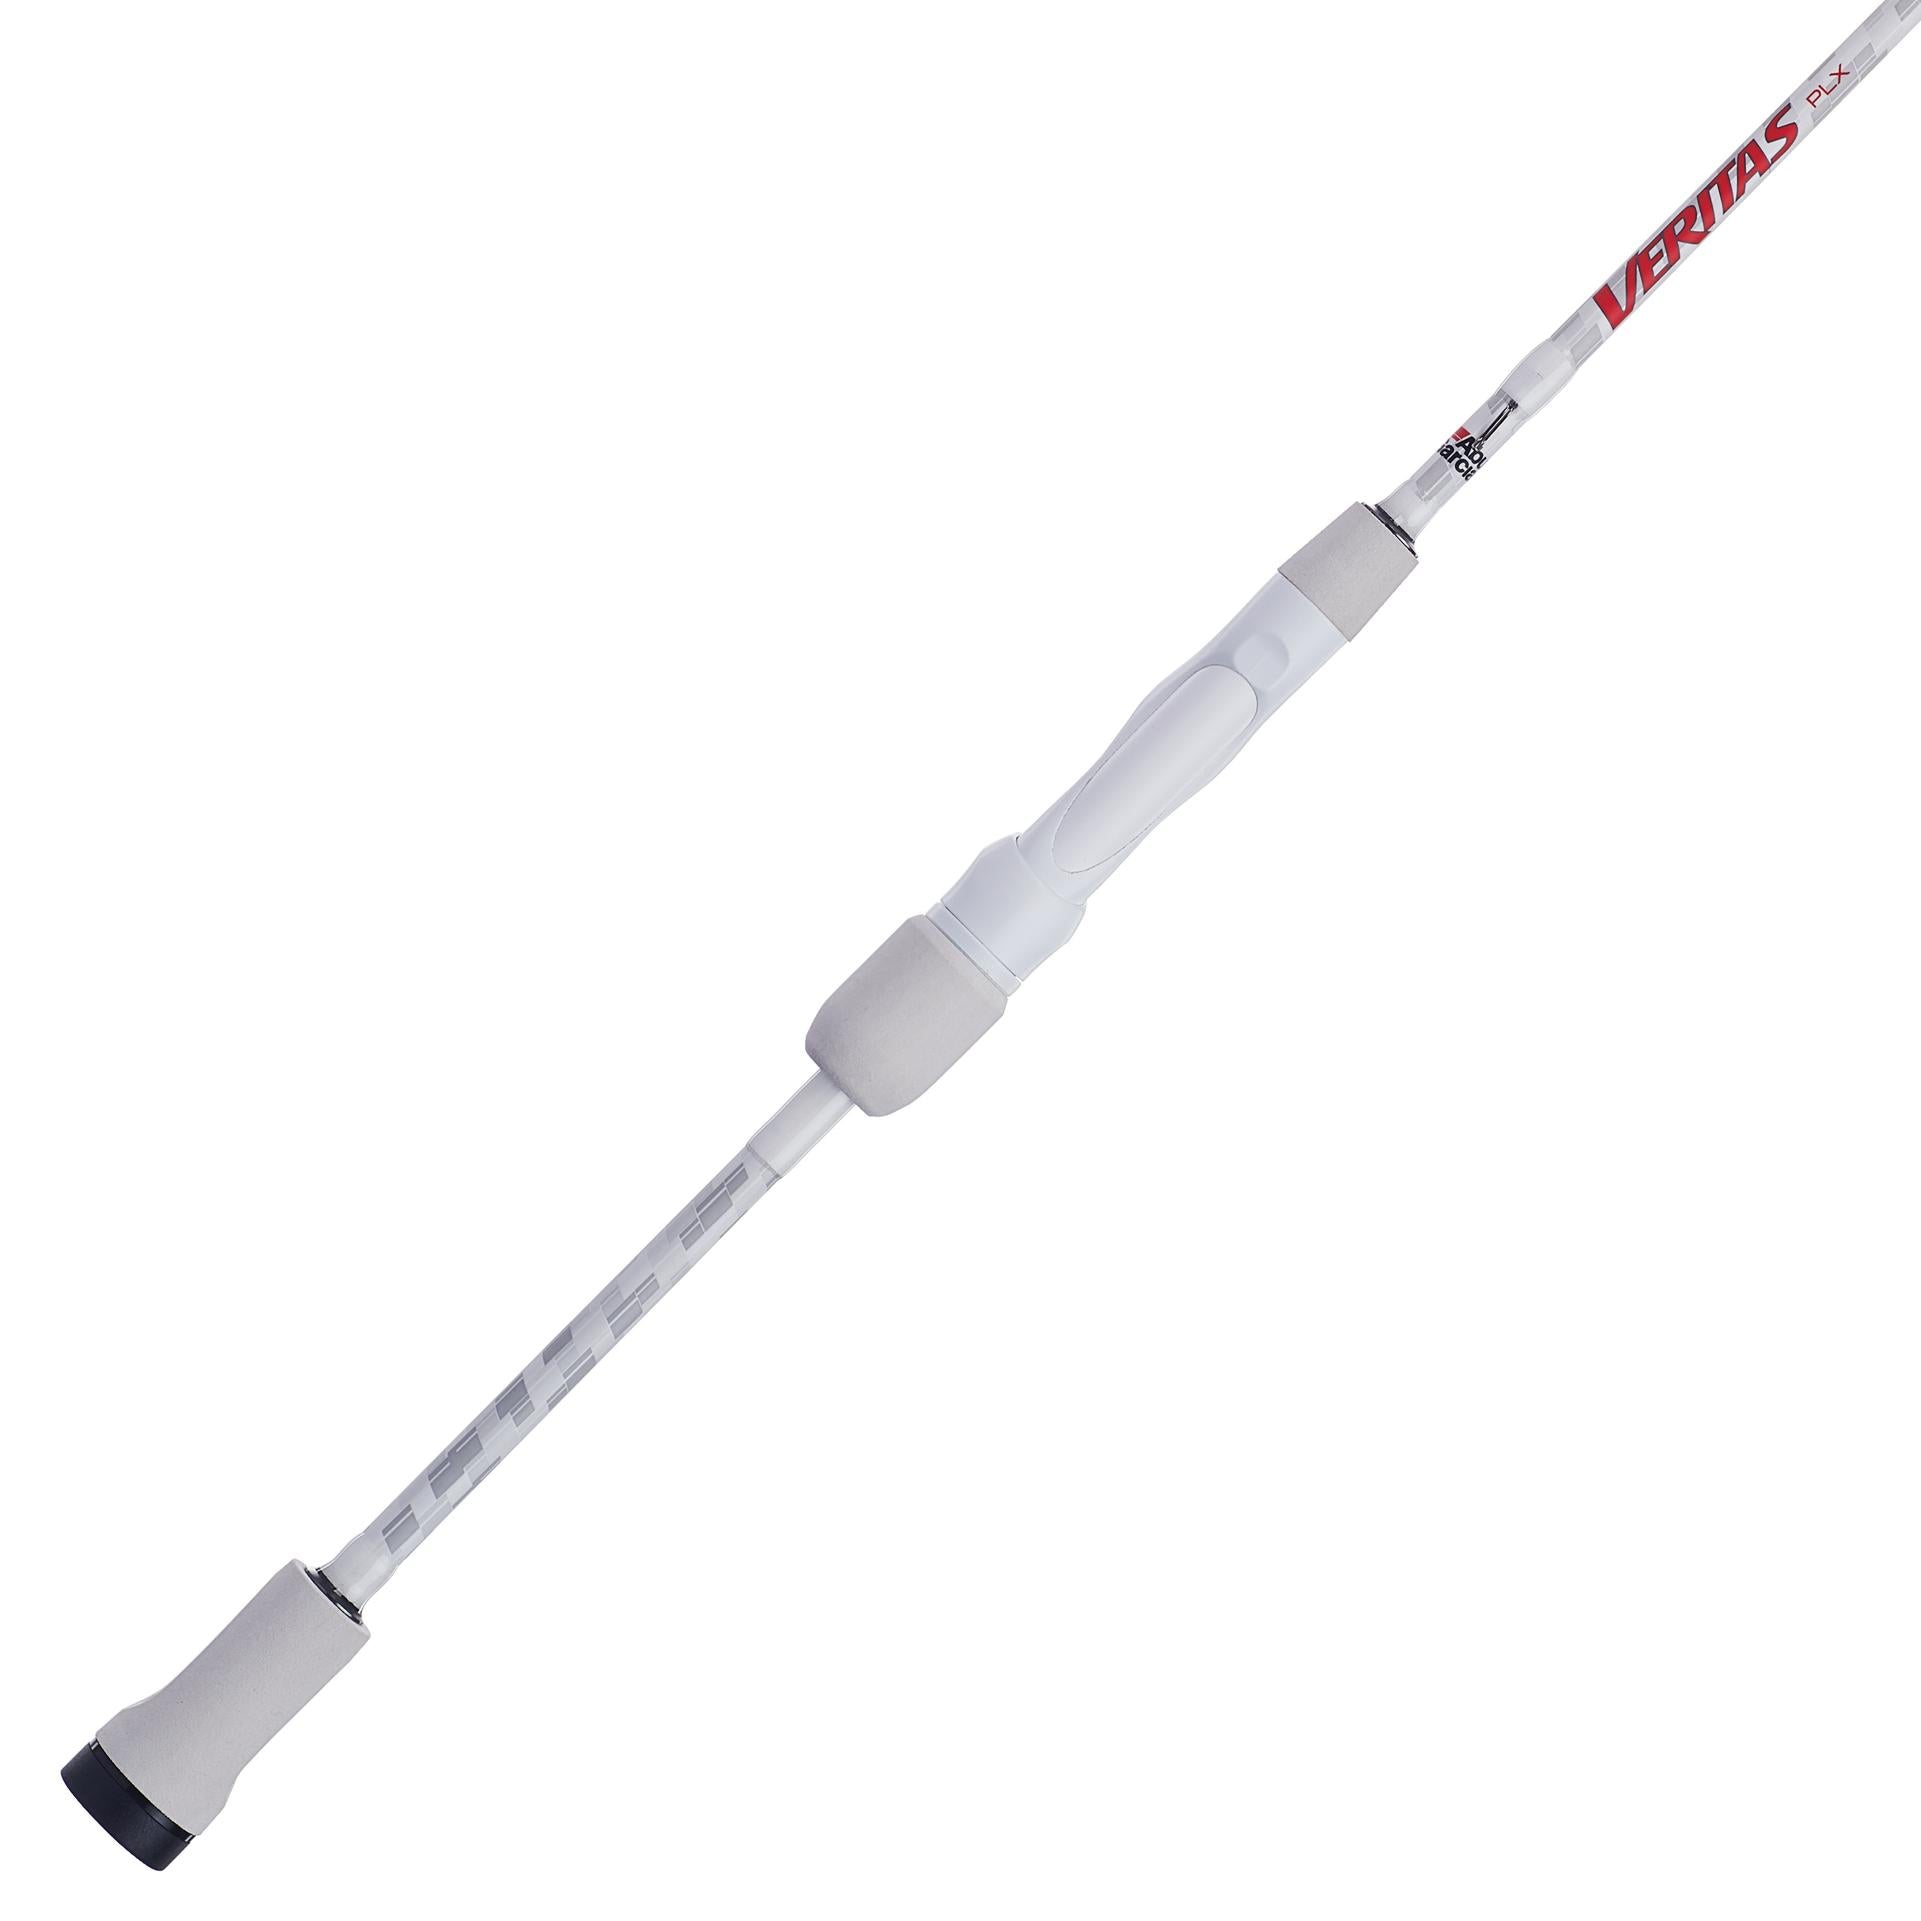 Abu Garcia Fishing Rods, Reels, and other Fishing Tackle – Abu 